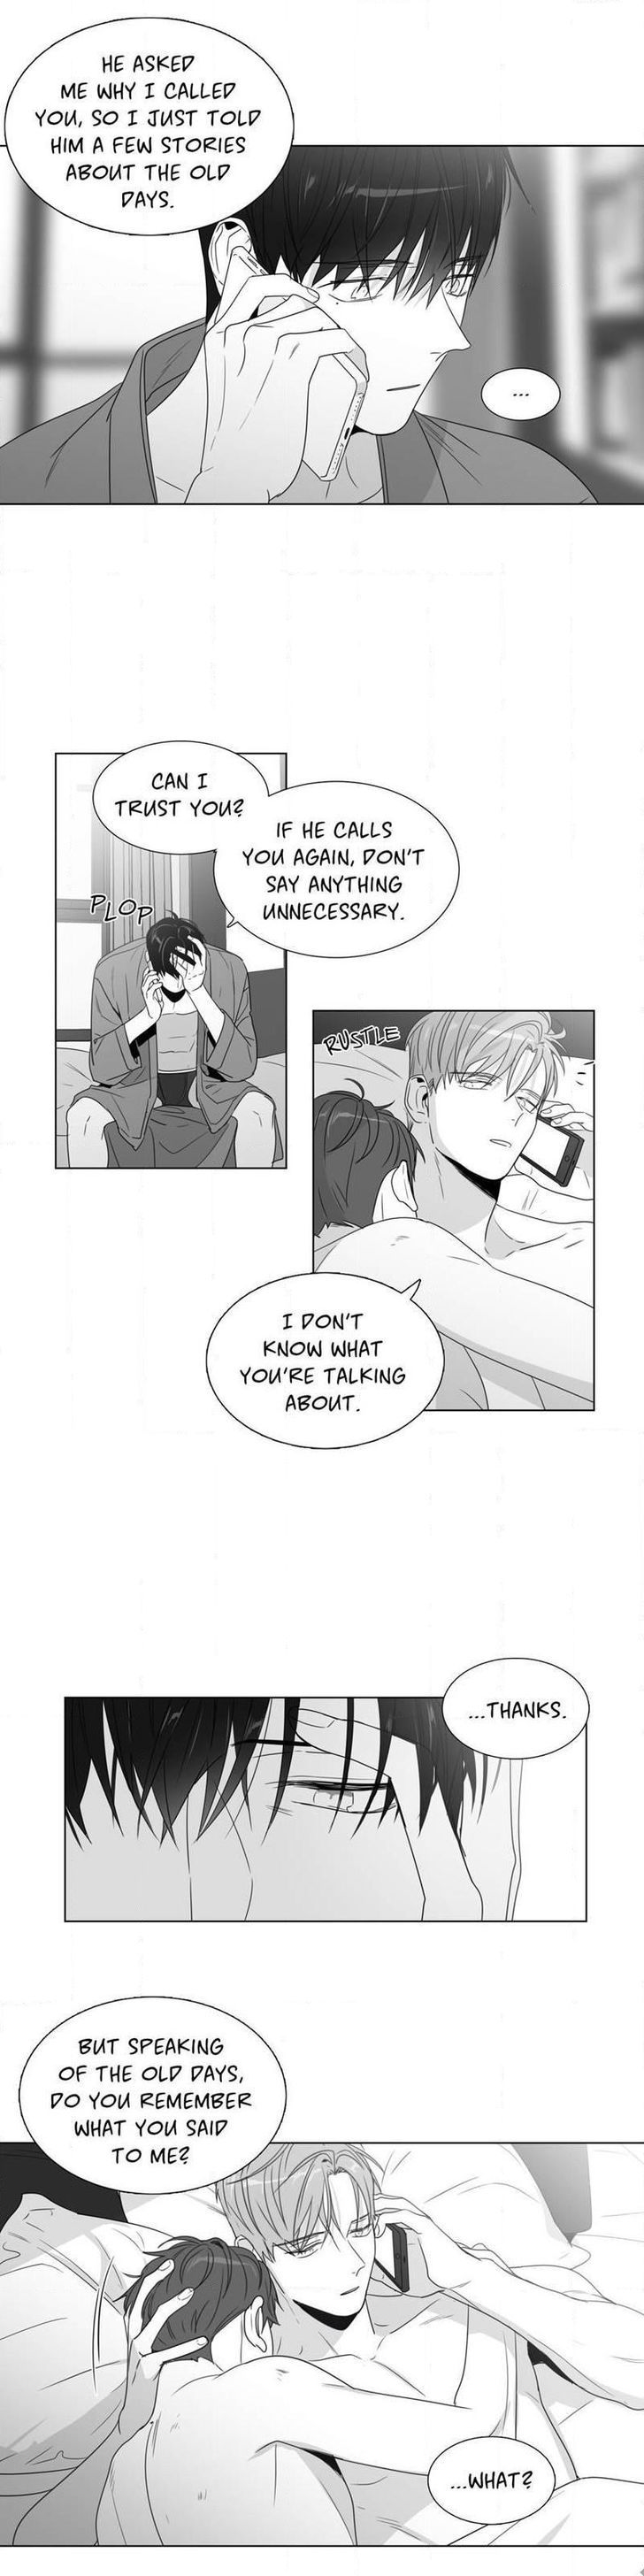 Lover Boy (Lezhin) Chapter 062 page 11